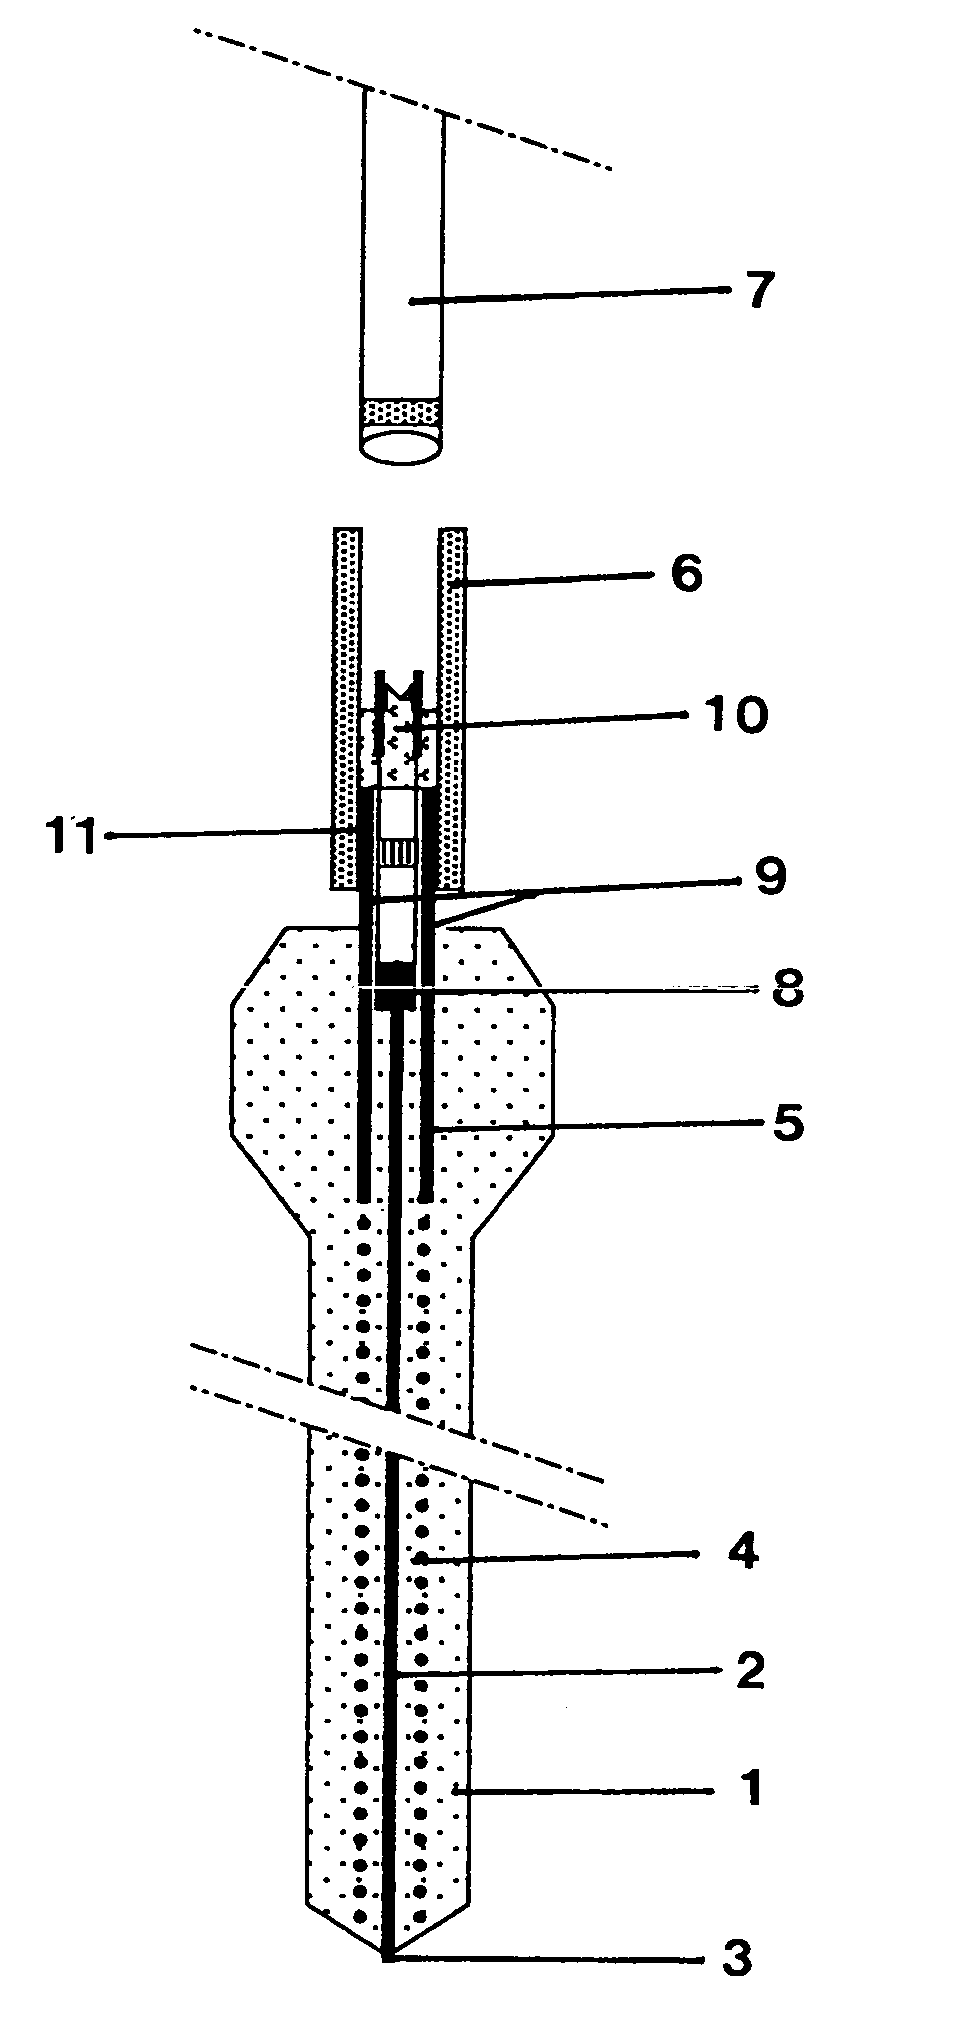 Device and method for measuring temperature in molten metals